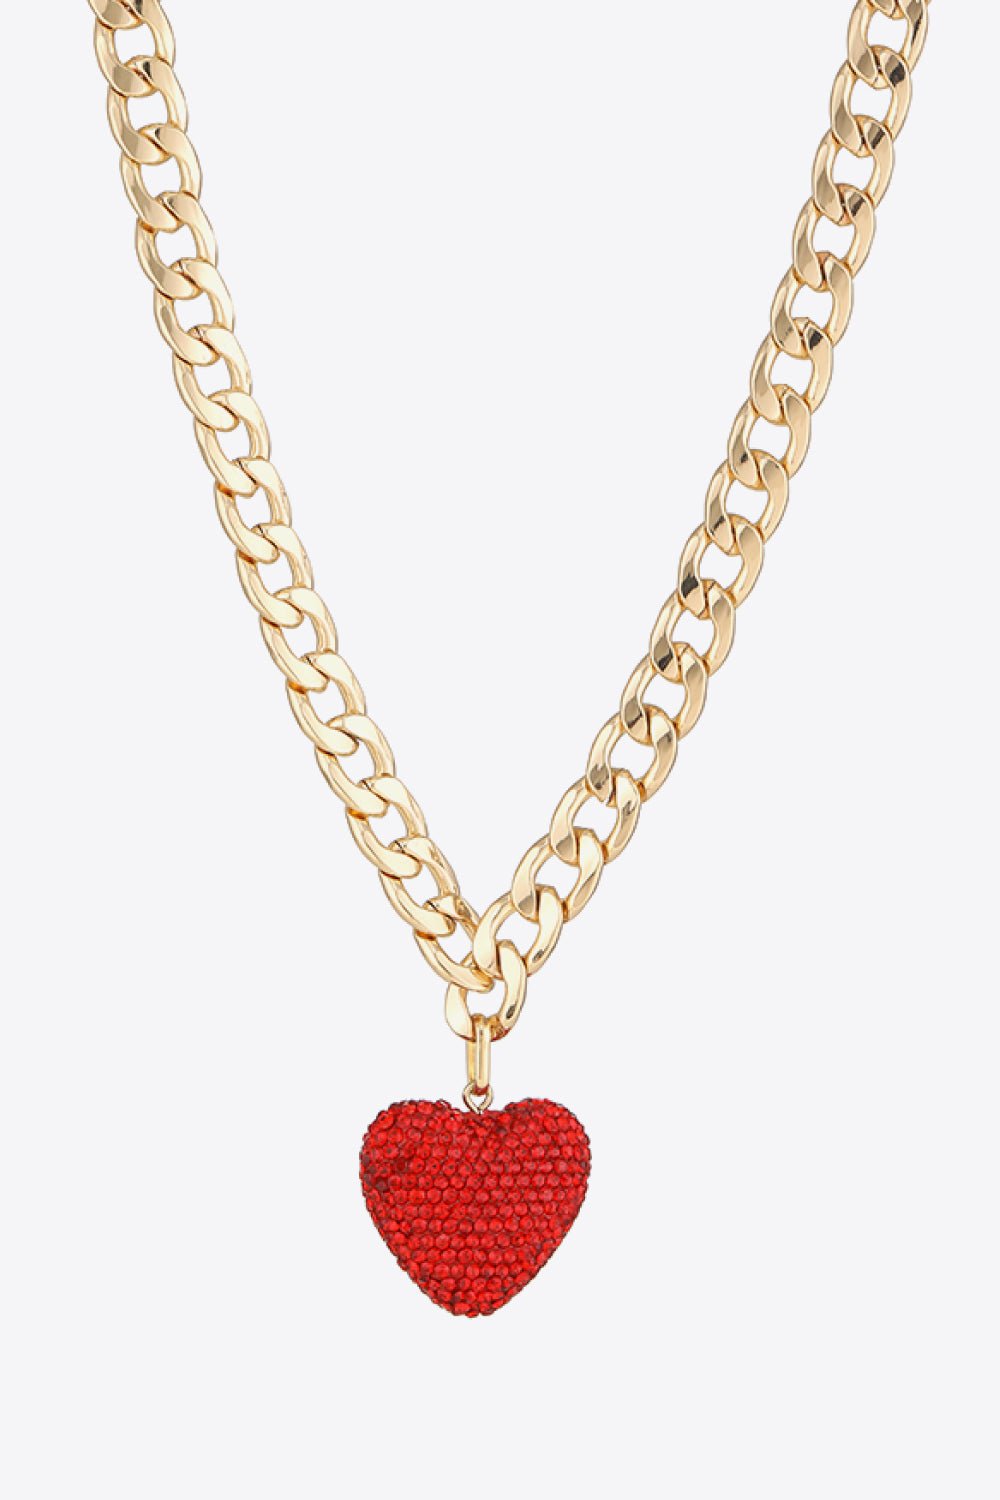 Red Rhinestone Heart Pendant Gold Curb Chain NecklaceNecklaceBeach Rose Co.